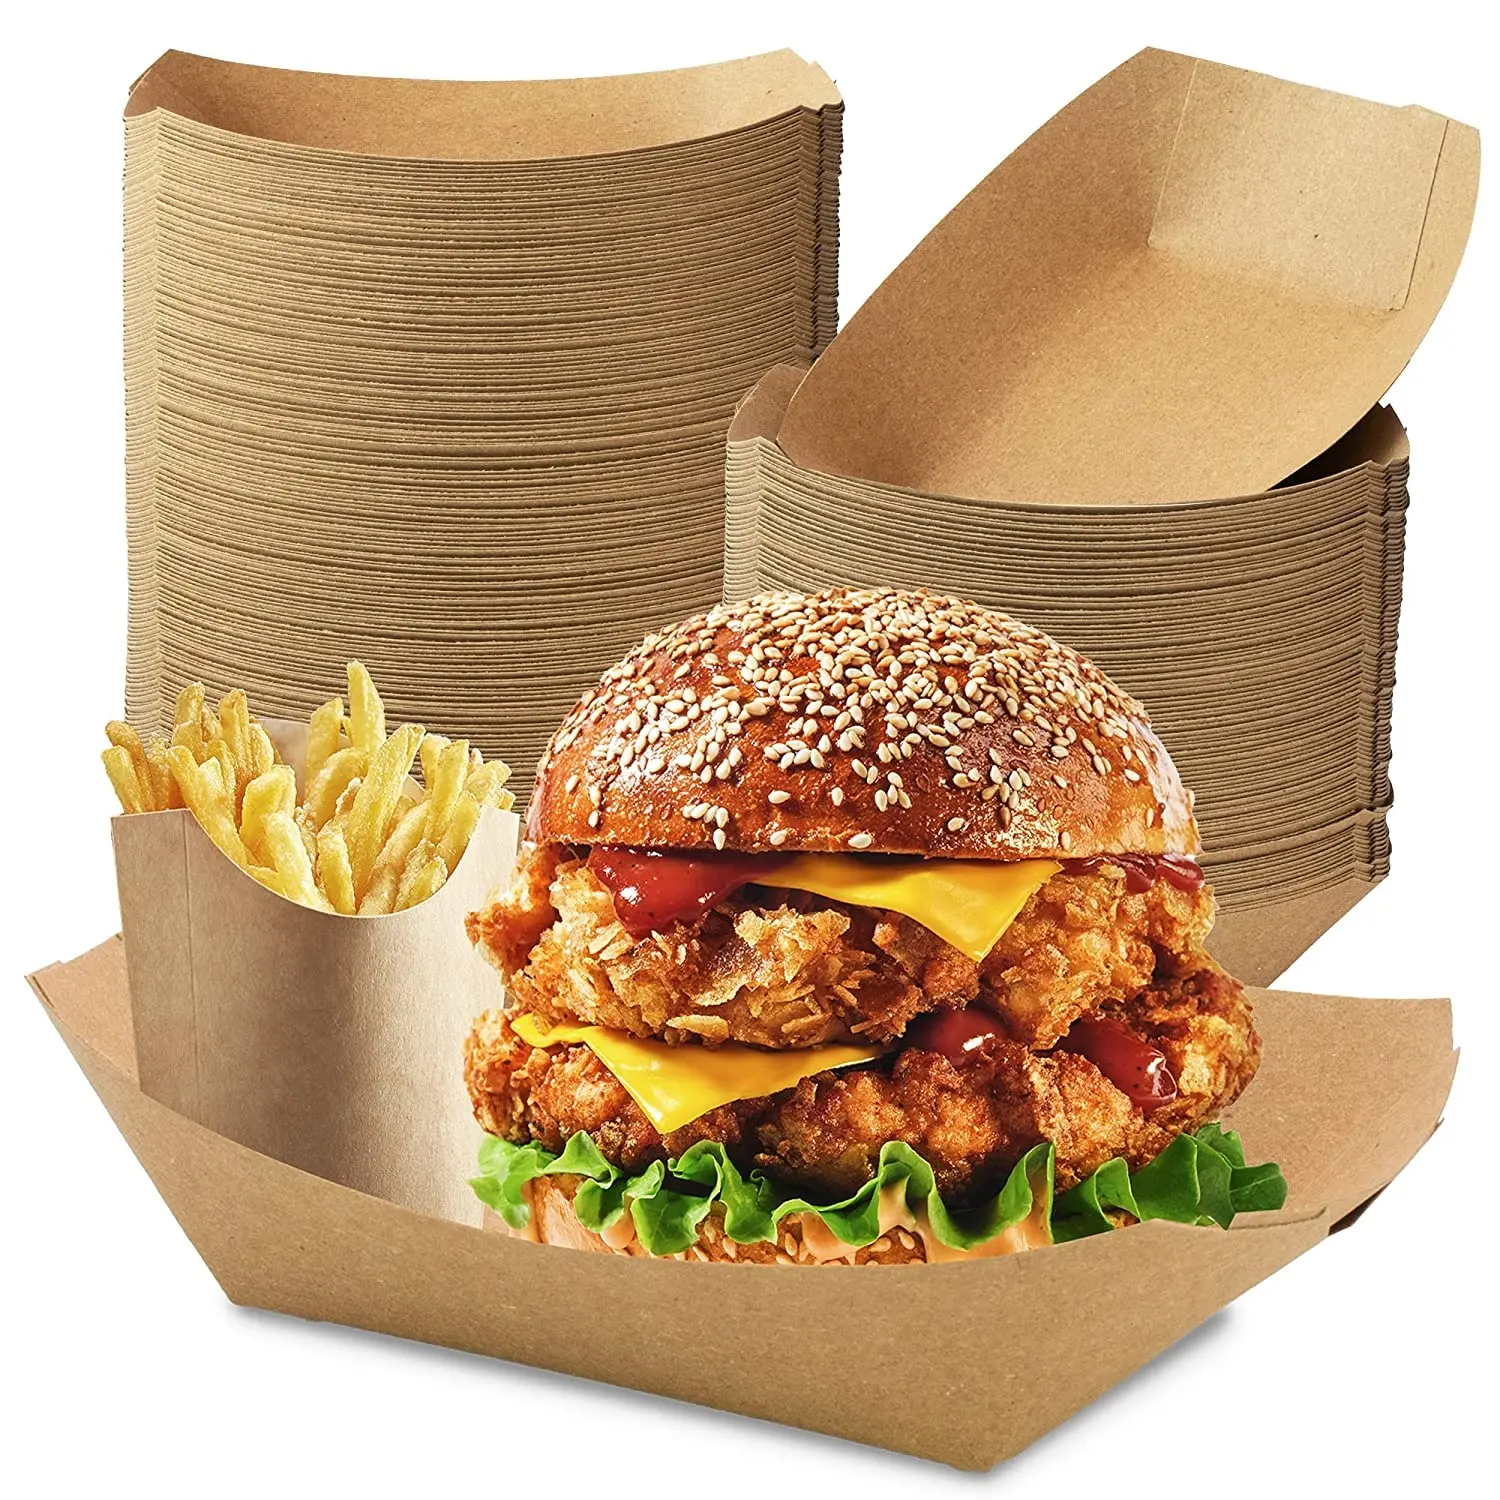 Eco friendly coated kraft paper boat box snack open boat box disposable paper food holder trays for nachos tacos